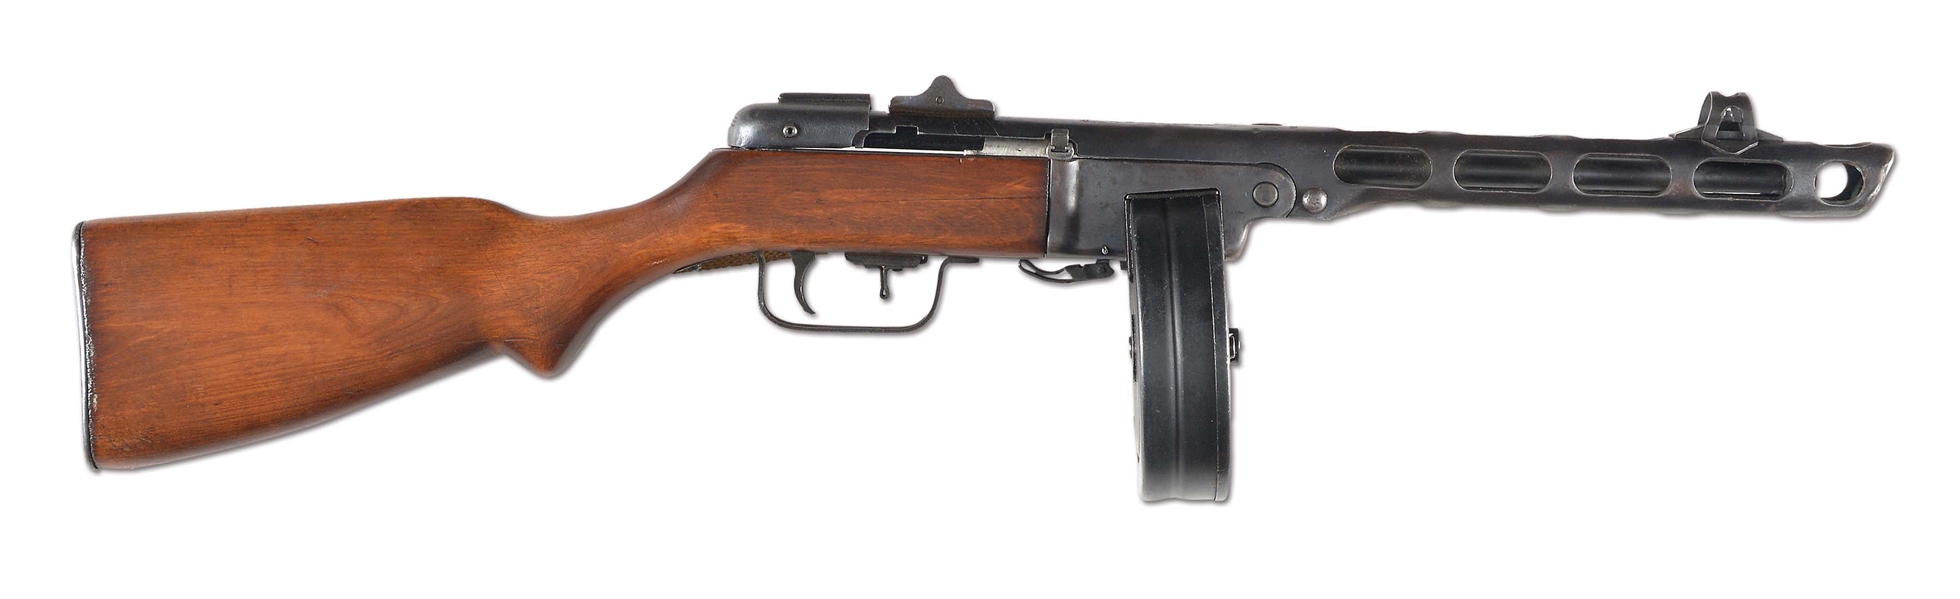 (N) ABSOLUTELY STUNNING CONDITION ORIGINAL AMNESTY REGISTERED RUSSIAN PPSH-41 MACHINE GUN WITH COPY OF ORIGINAL AMNESTY REGISTRATION FORM (CURIO AND RELIC).